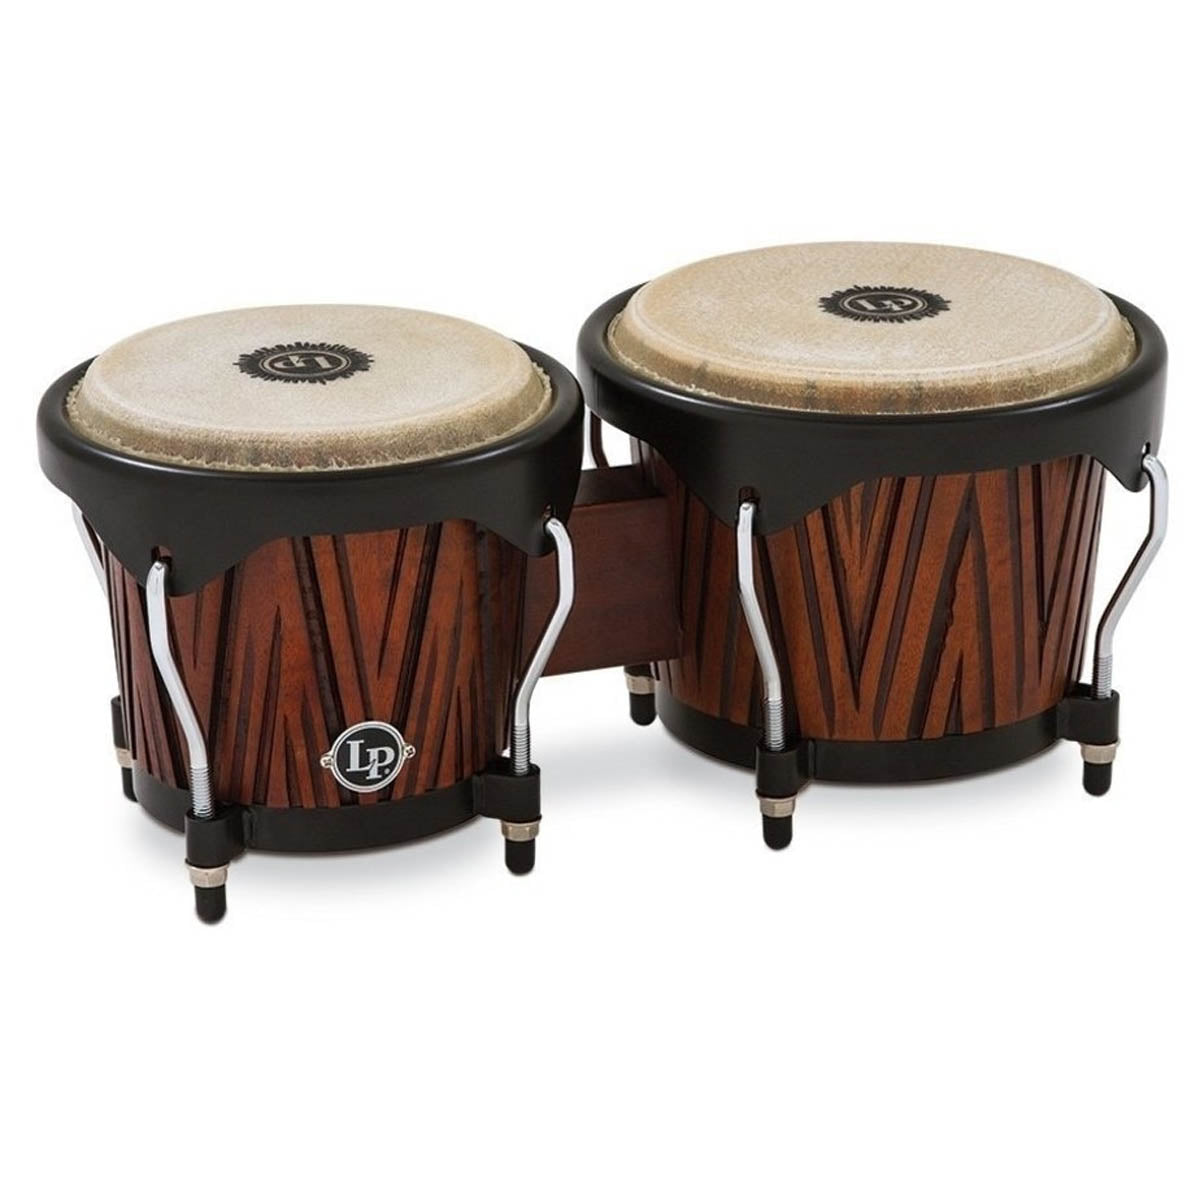 LP Percussion City Series LP601NY Bongos in Carved Mango